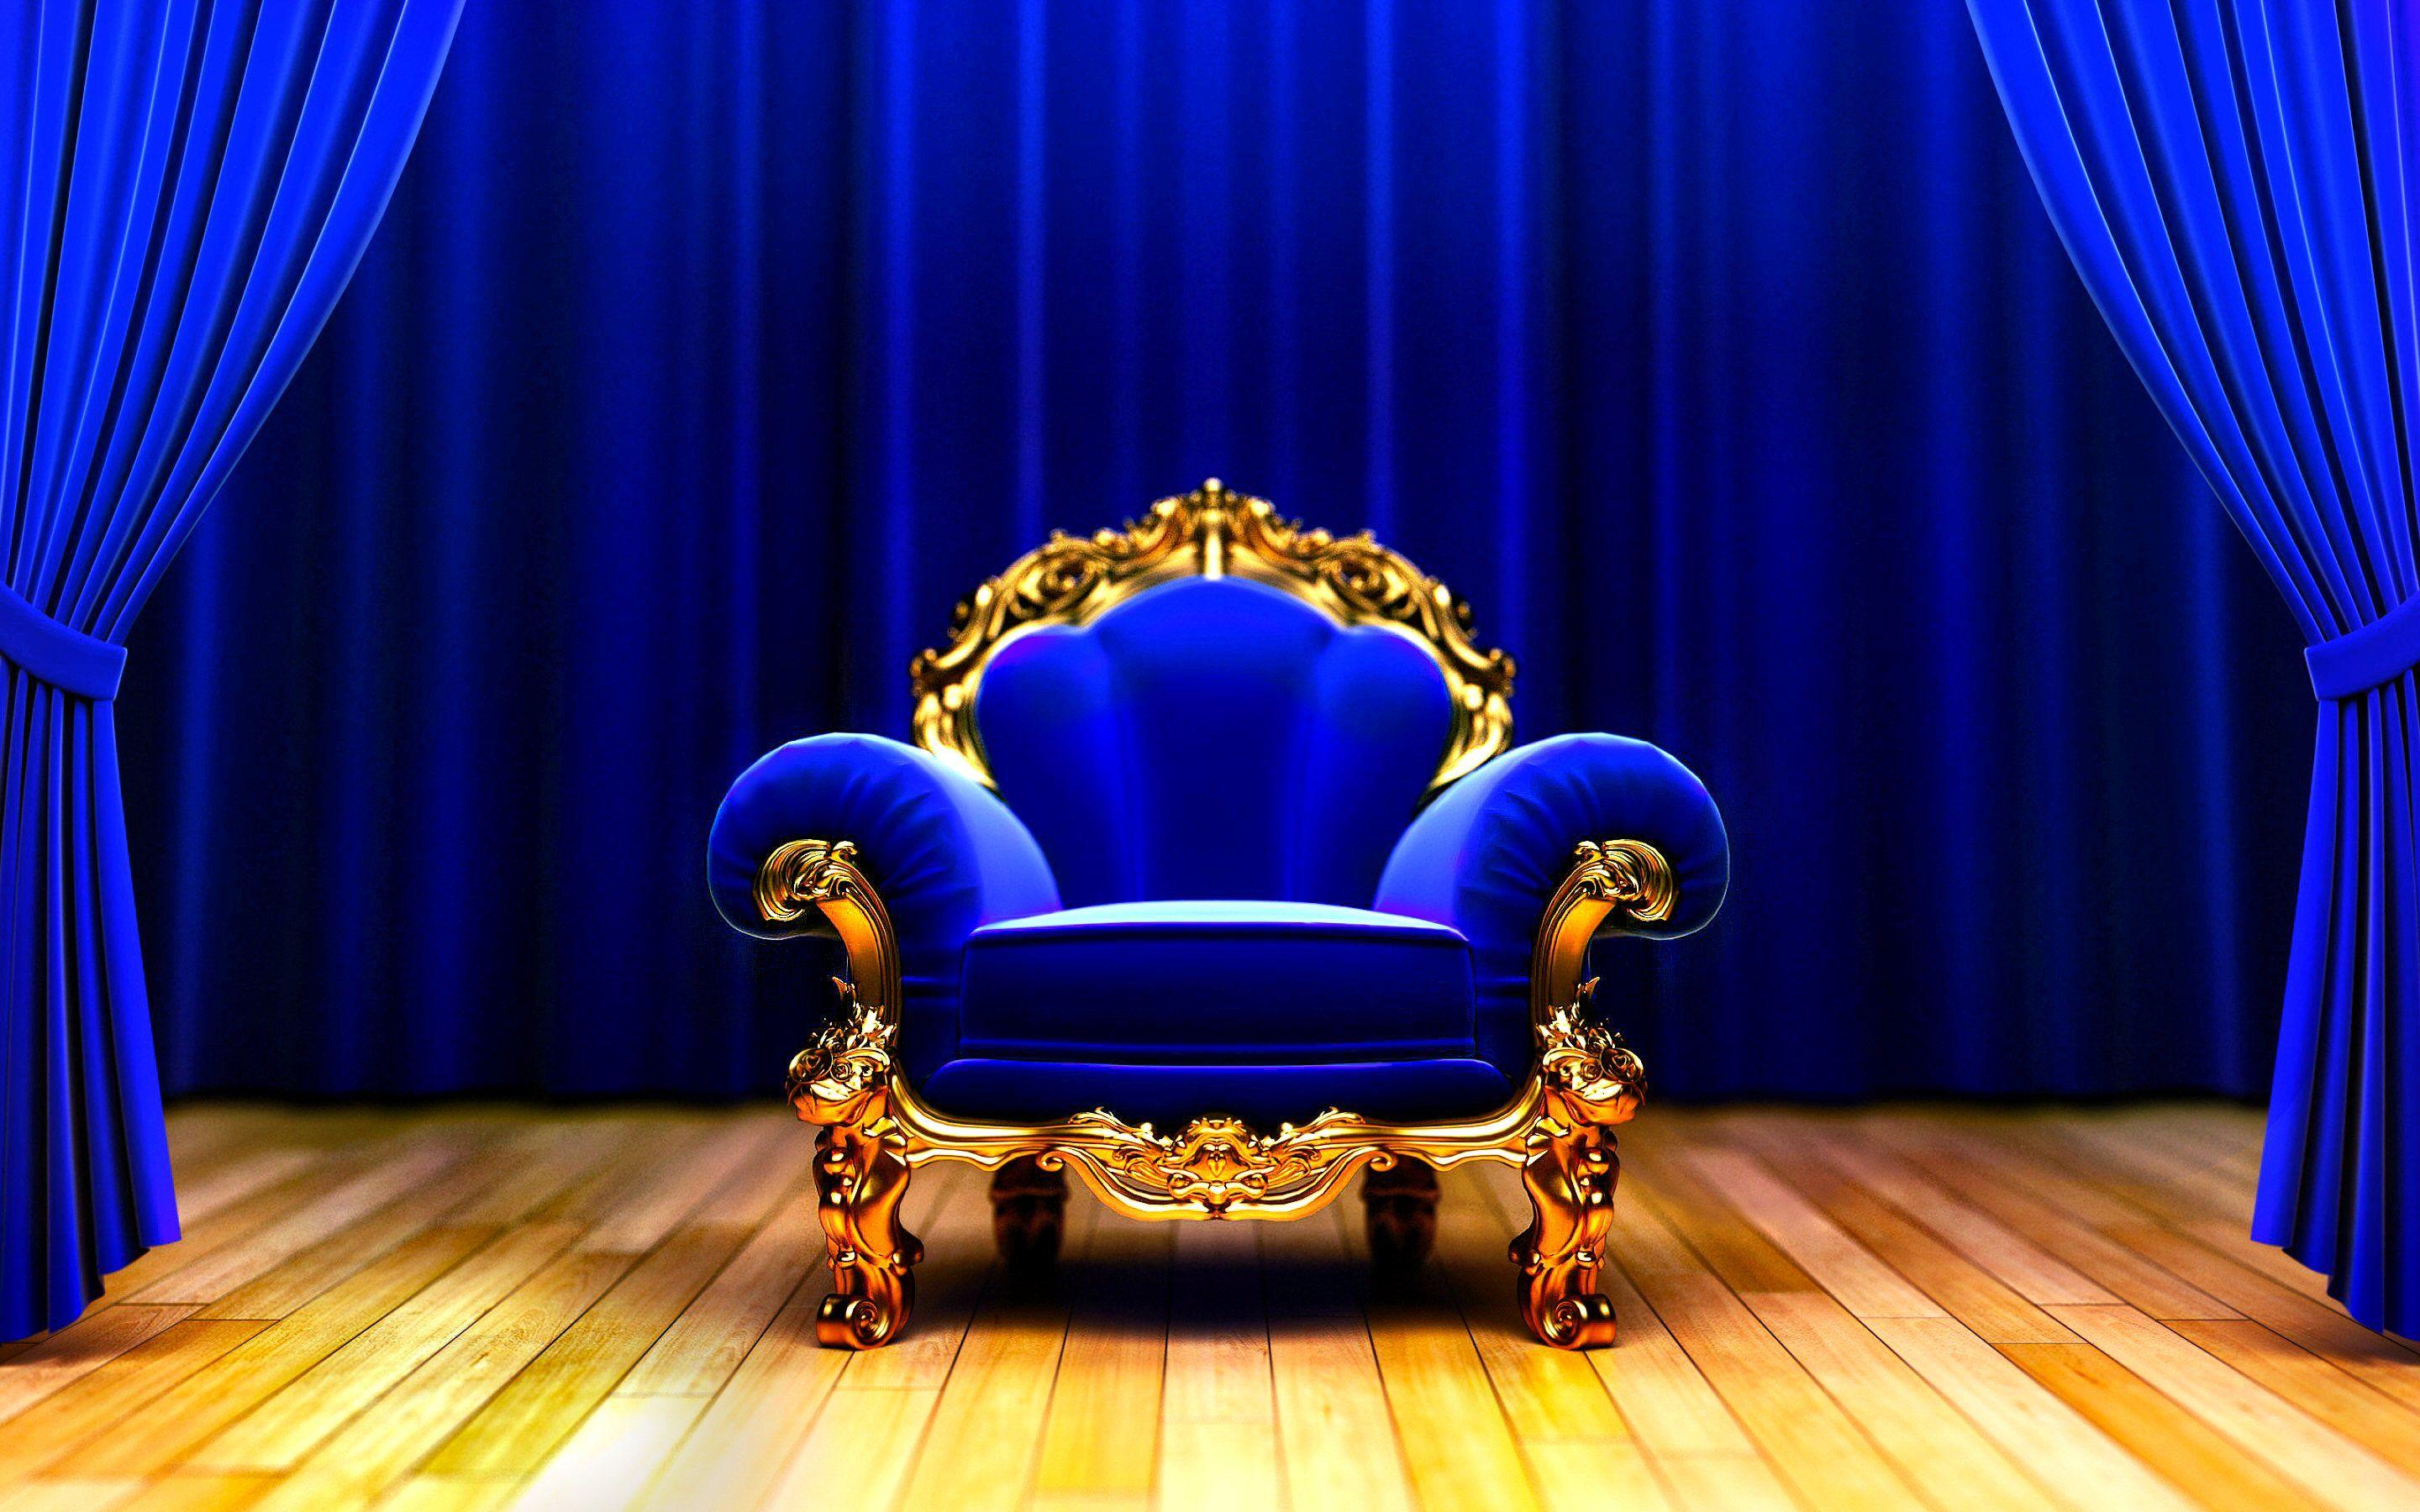 Chair Wallpapers - Wallpaper Cave